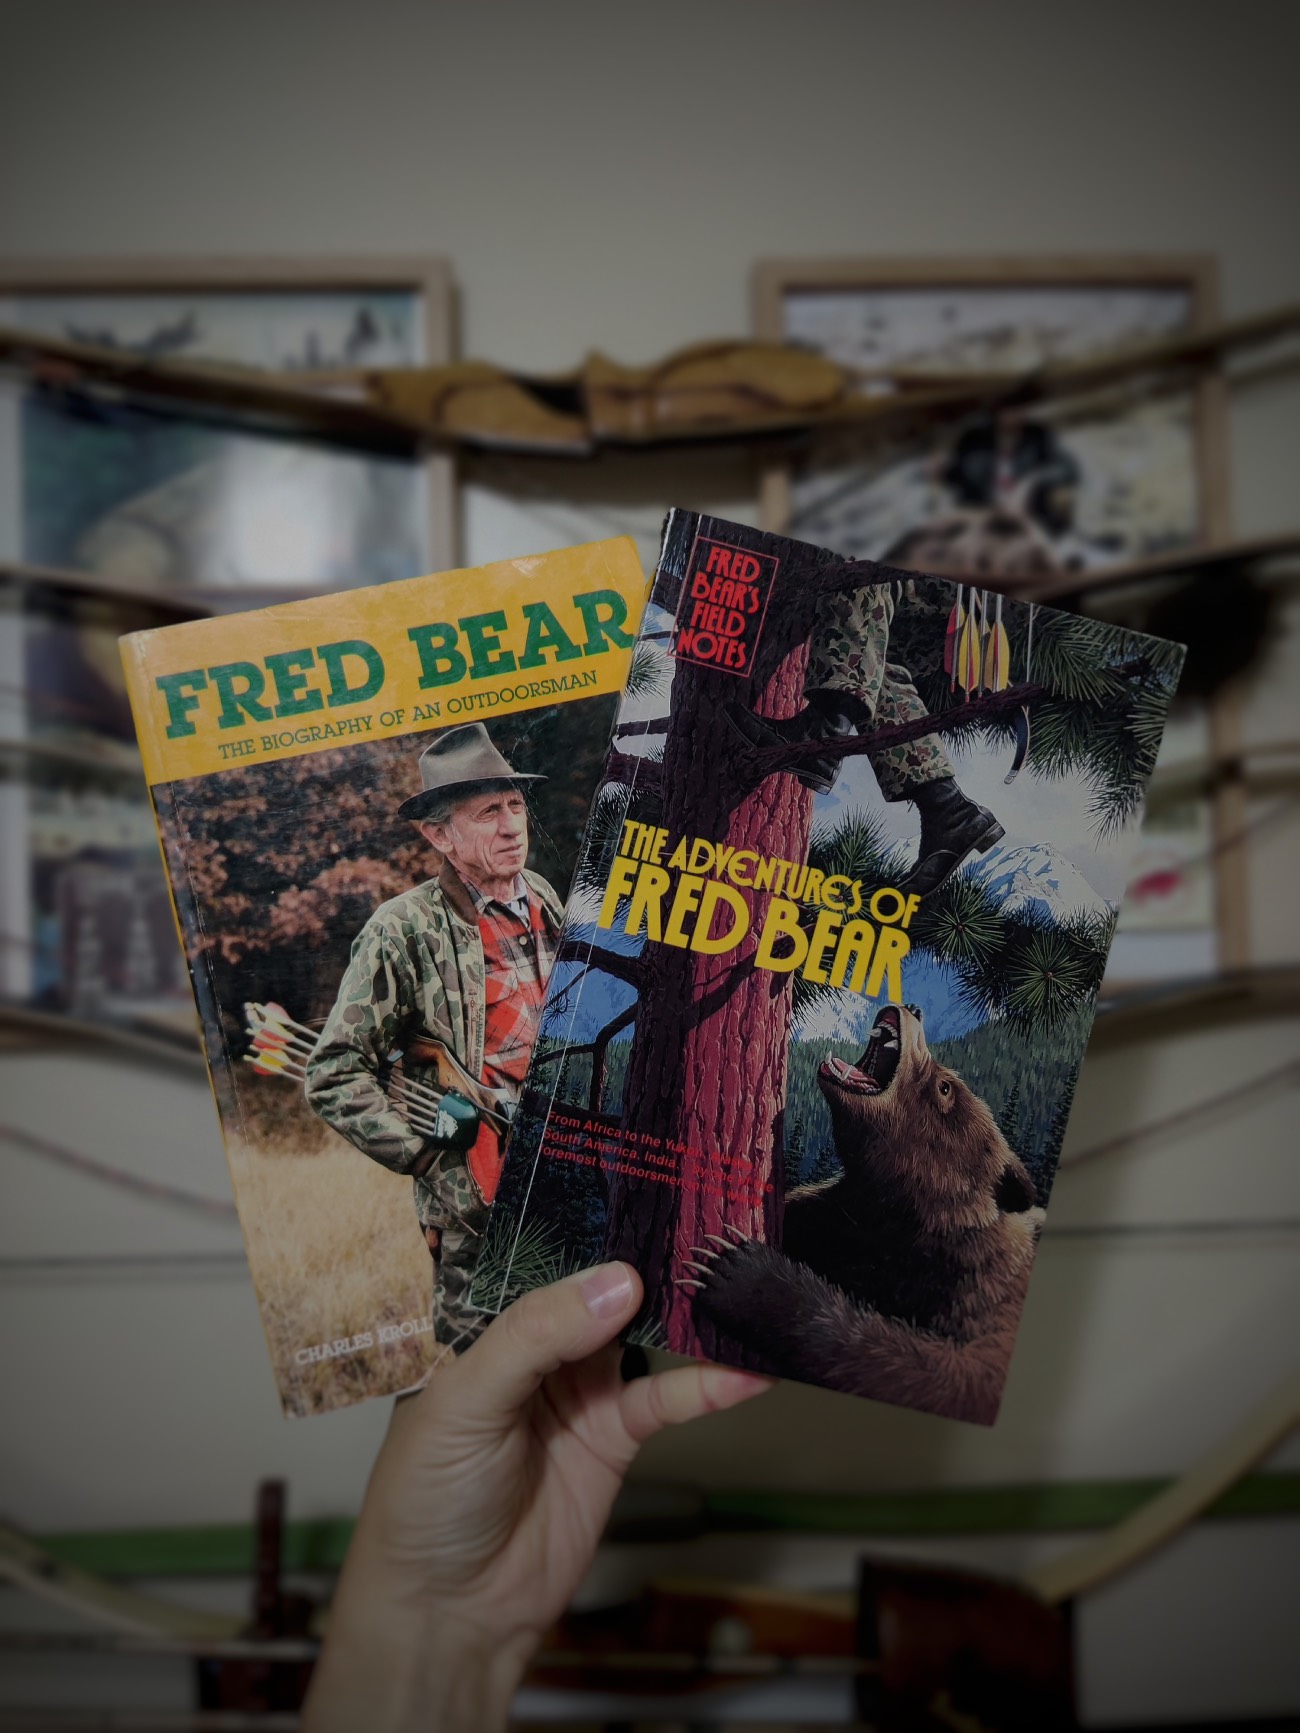 the Fred bear biography and field notes held in the air